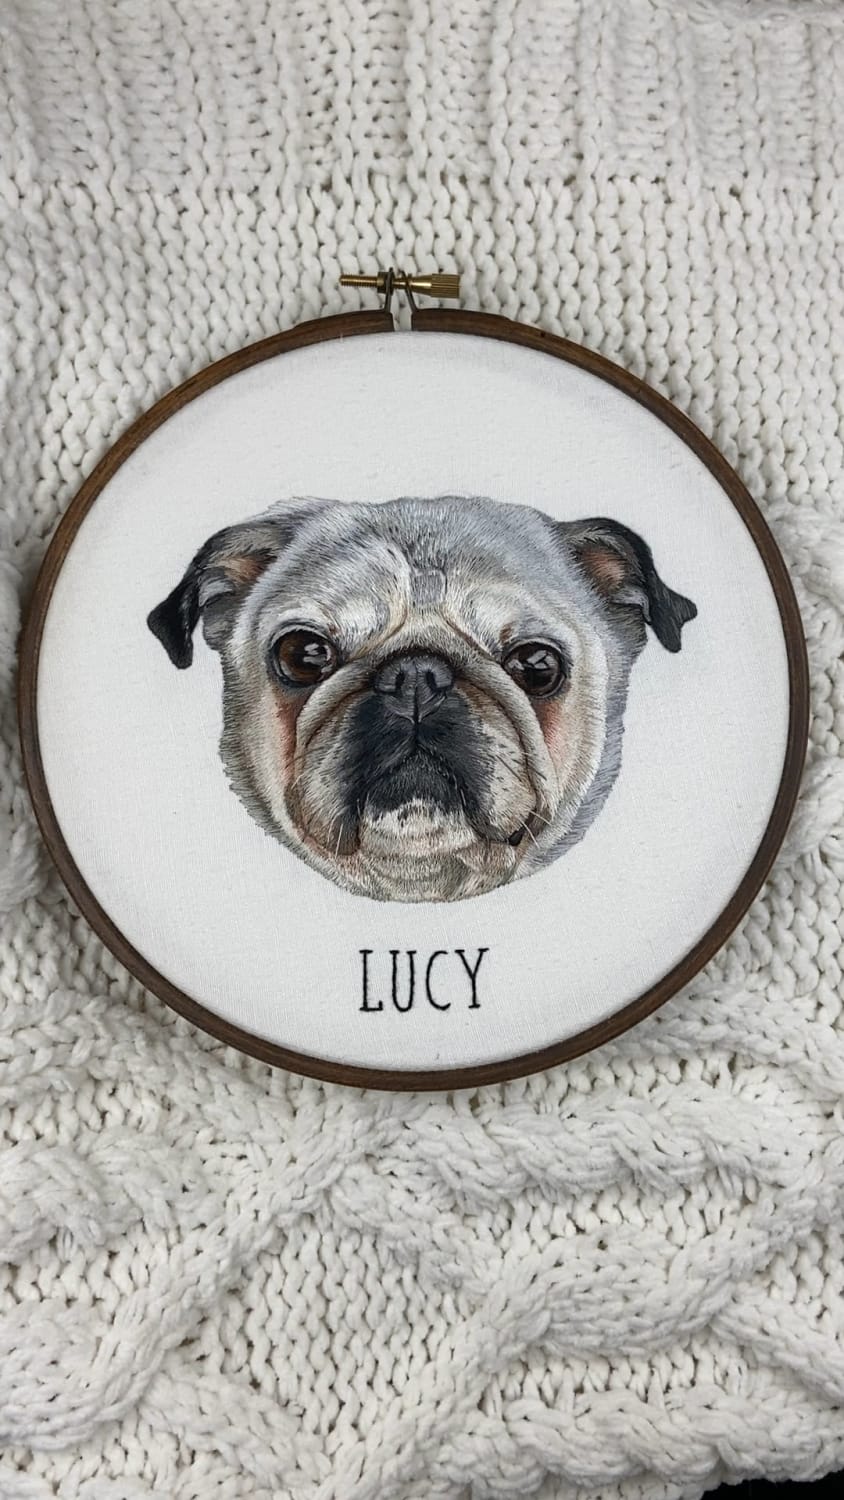 A mini video tour of my most recently stitched pet portrait. I have such a soft spot for pugs, especially senior ones!